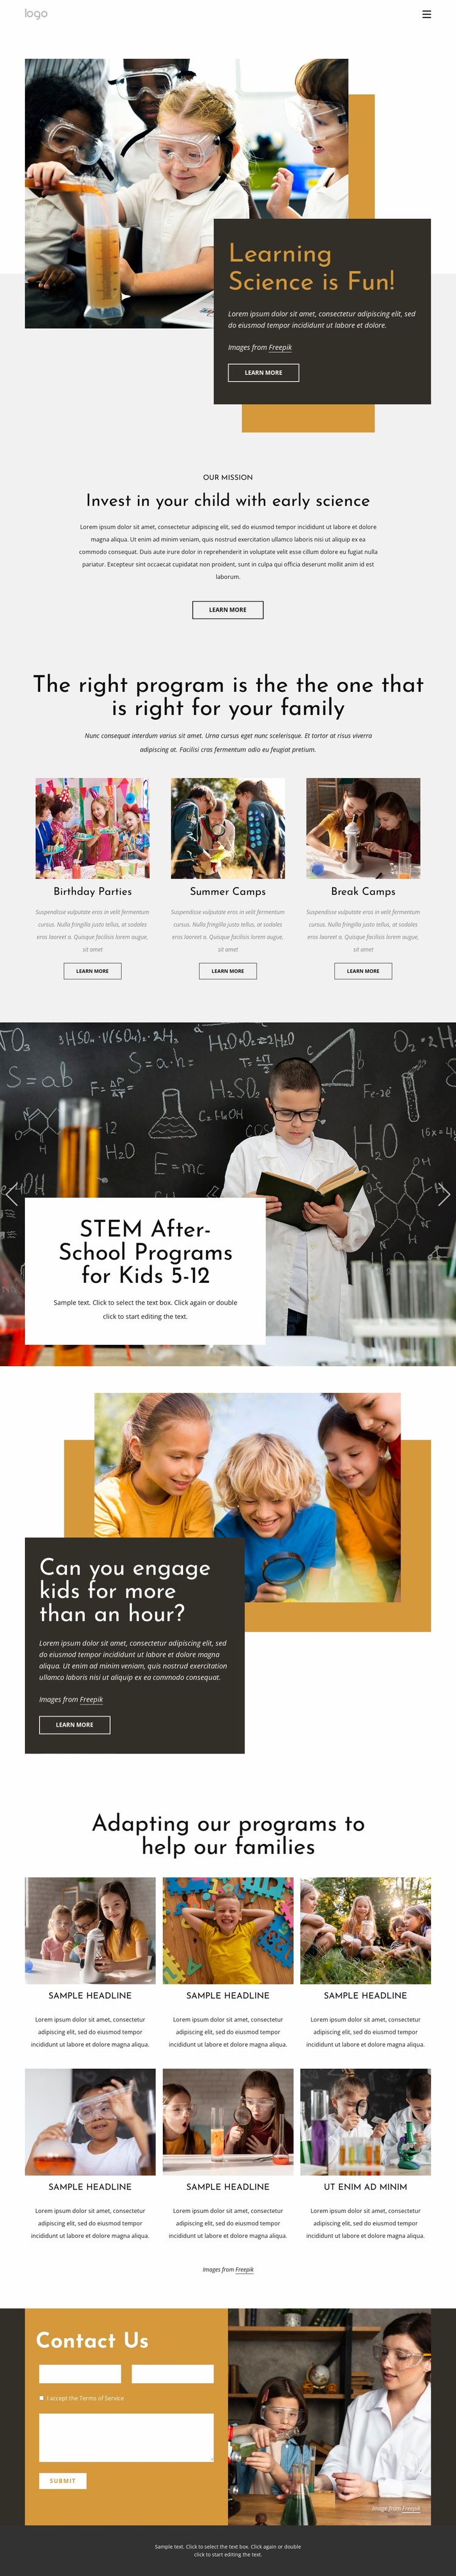 Learning science is fun Website Design